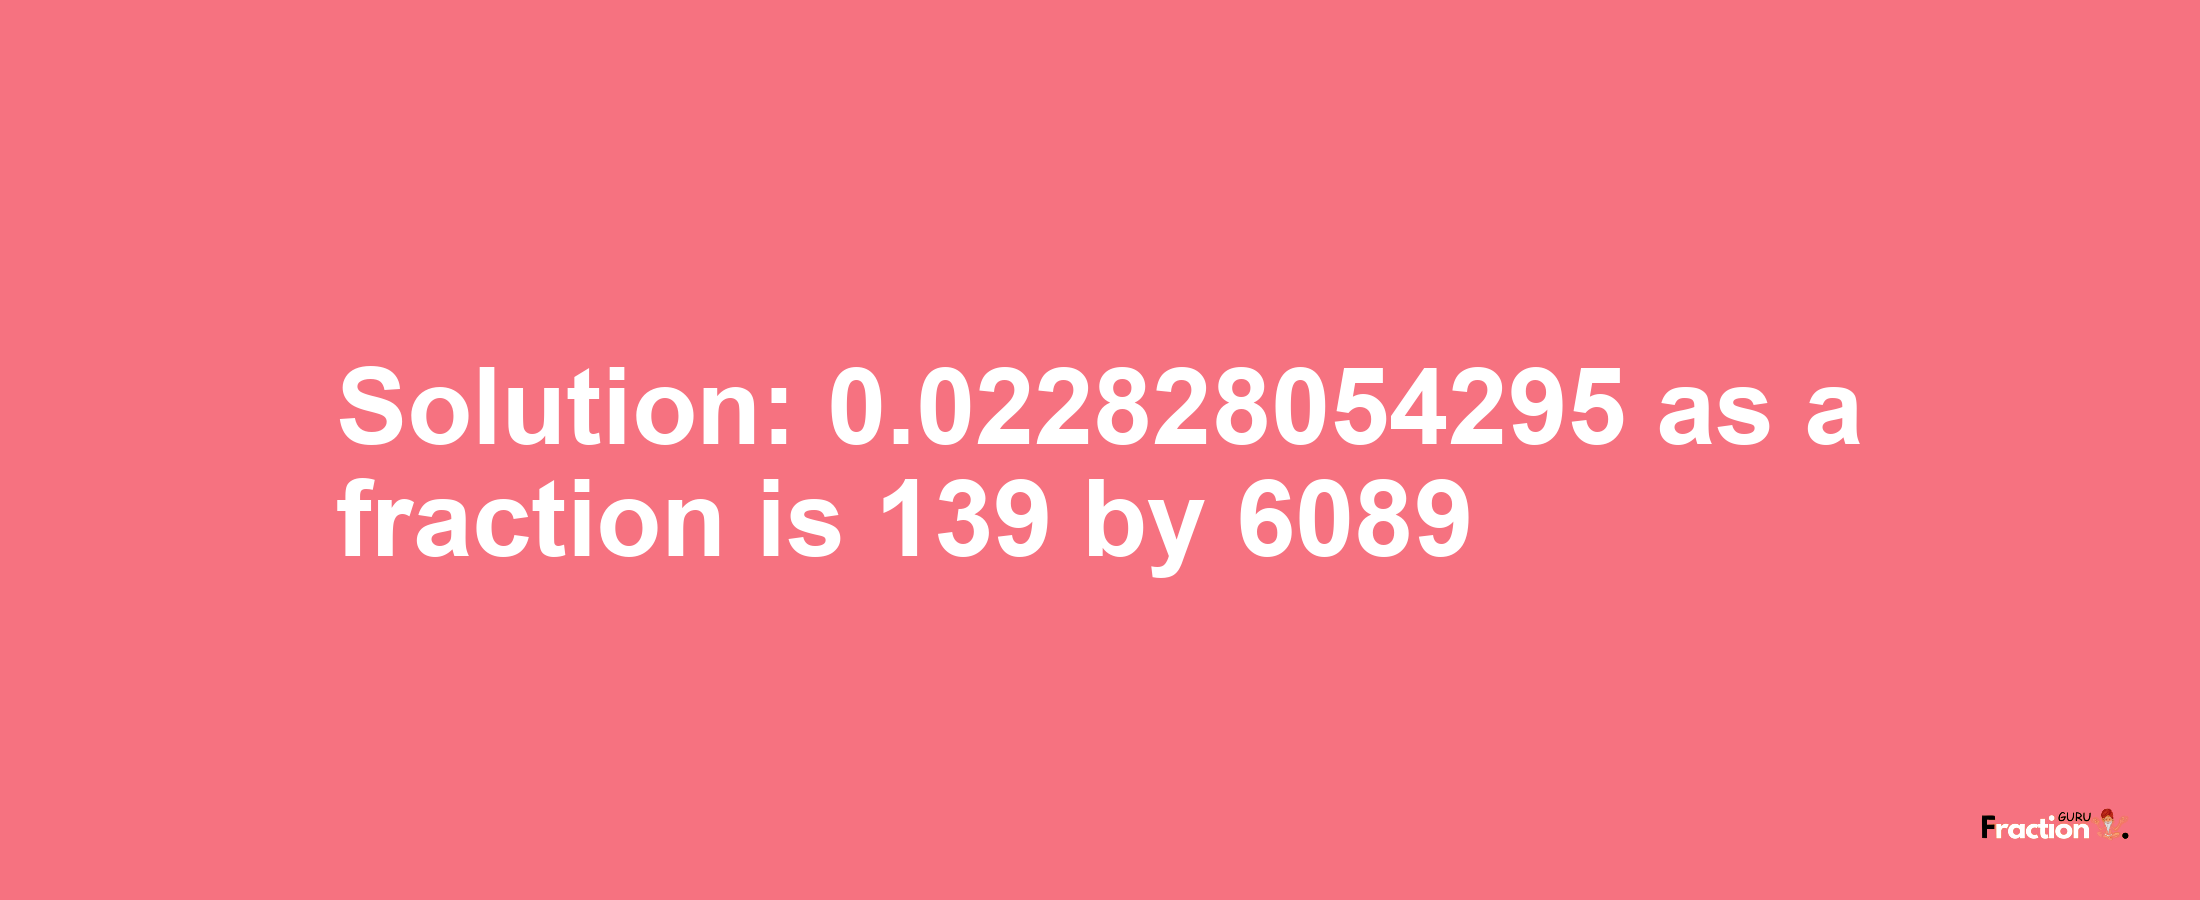 Solution:0.022828054295 as a fraction is 139/6089